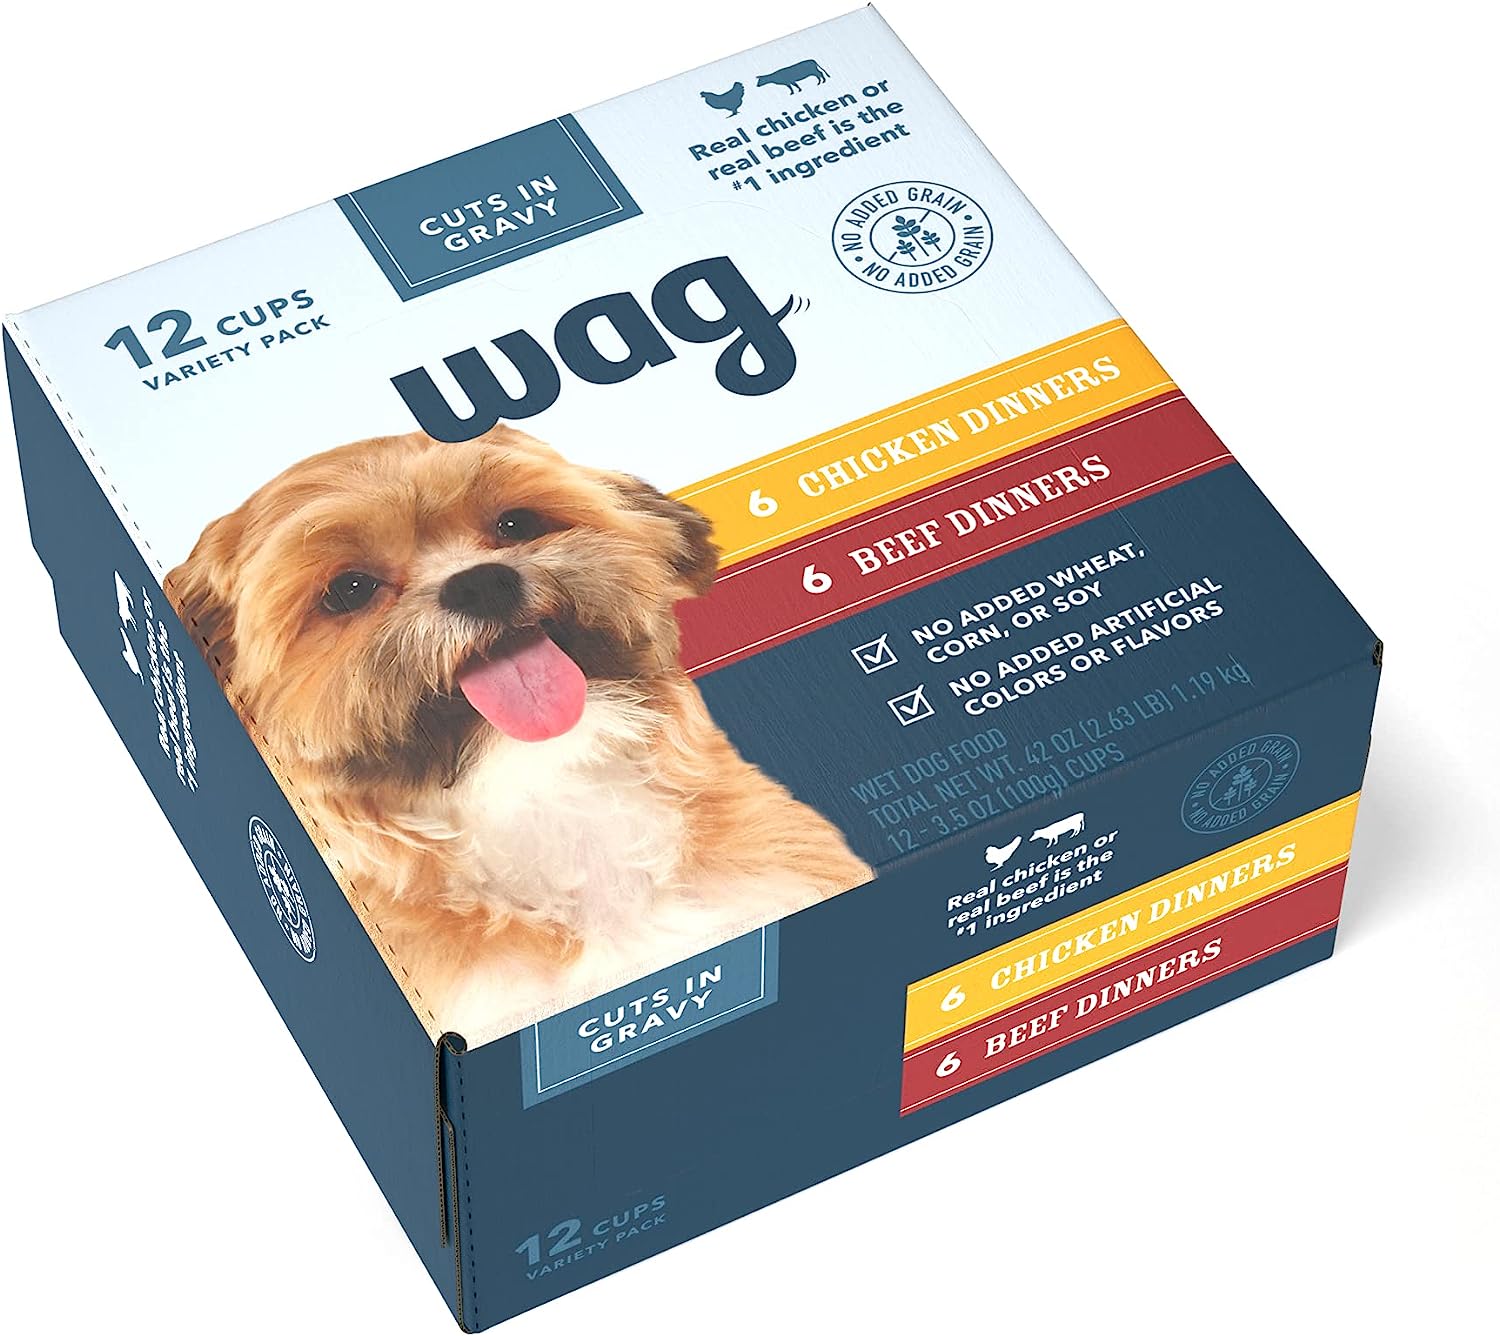 How are pet food pouches any better than canned pet food?